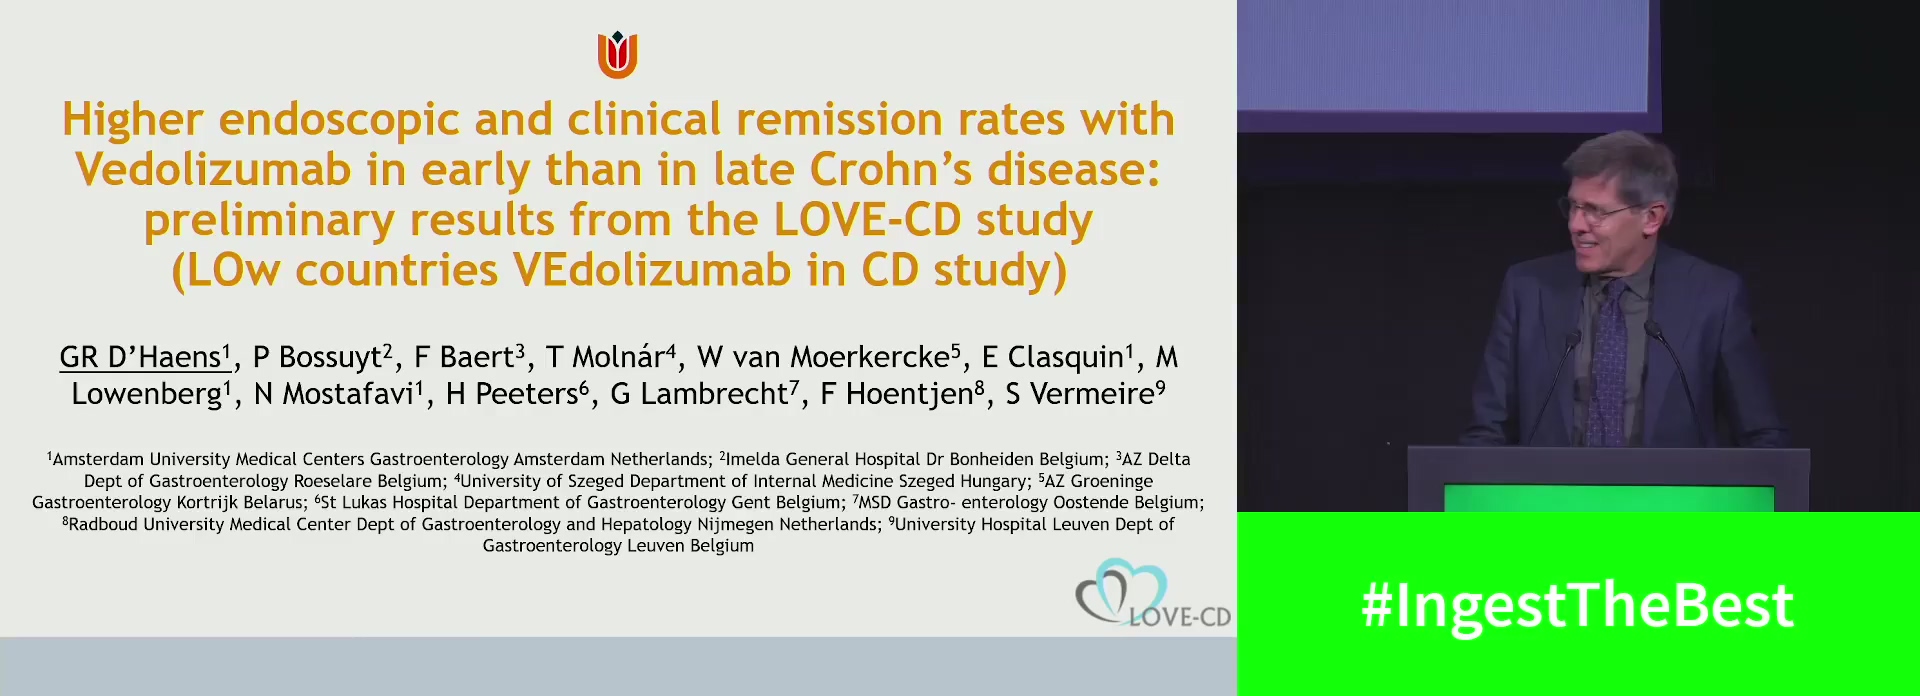 HIGHER ENDOSCOPIC AND CLINICAL REMISSION RATES WITH VEDOLIZUMAB IN EARLY THAN IN LATE CROHN’S DISEASE: RESULTS FROM THE LOVE-CD STUDY (LOW COUNTRIES VEDOLIZUMAB IN CD STUDY)